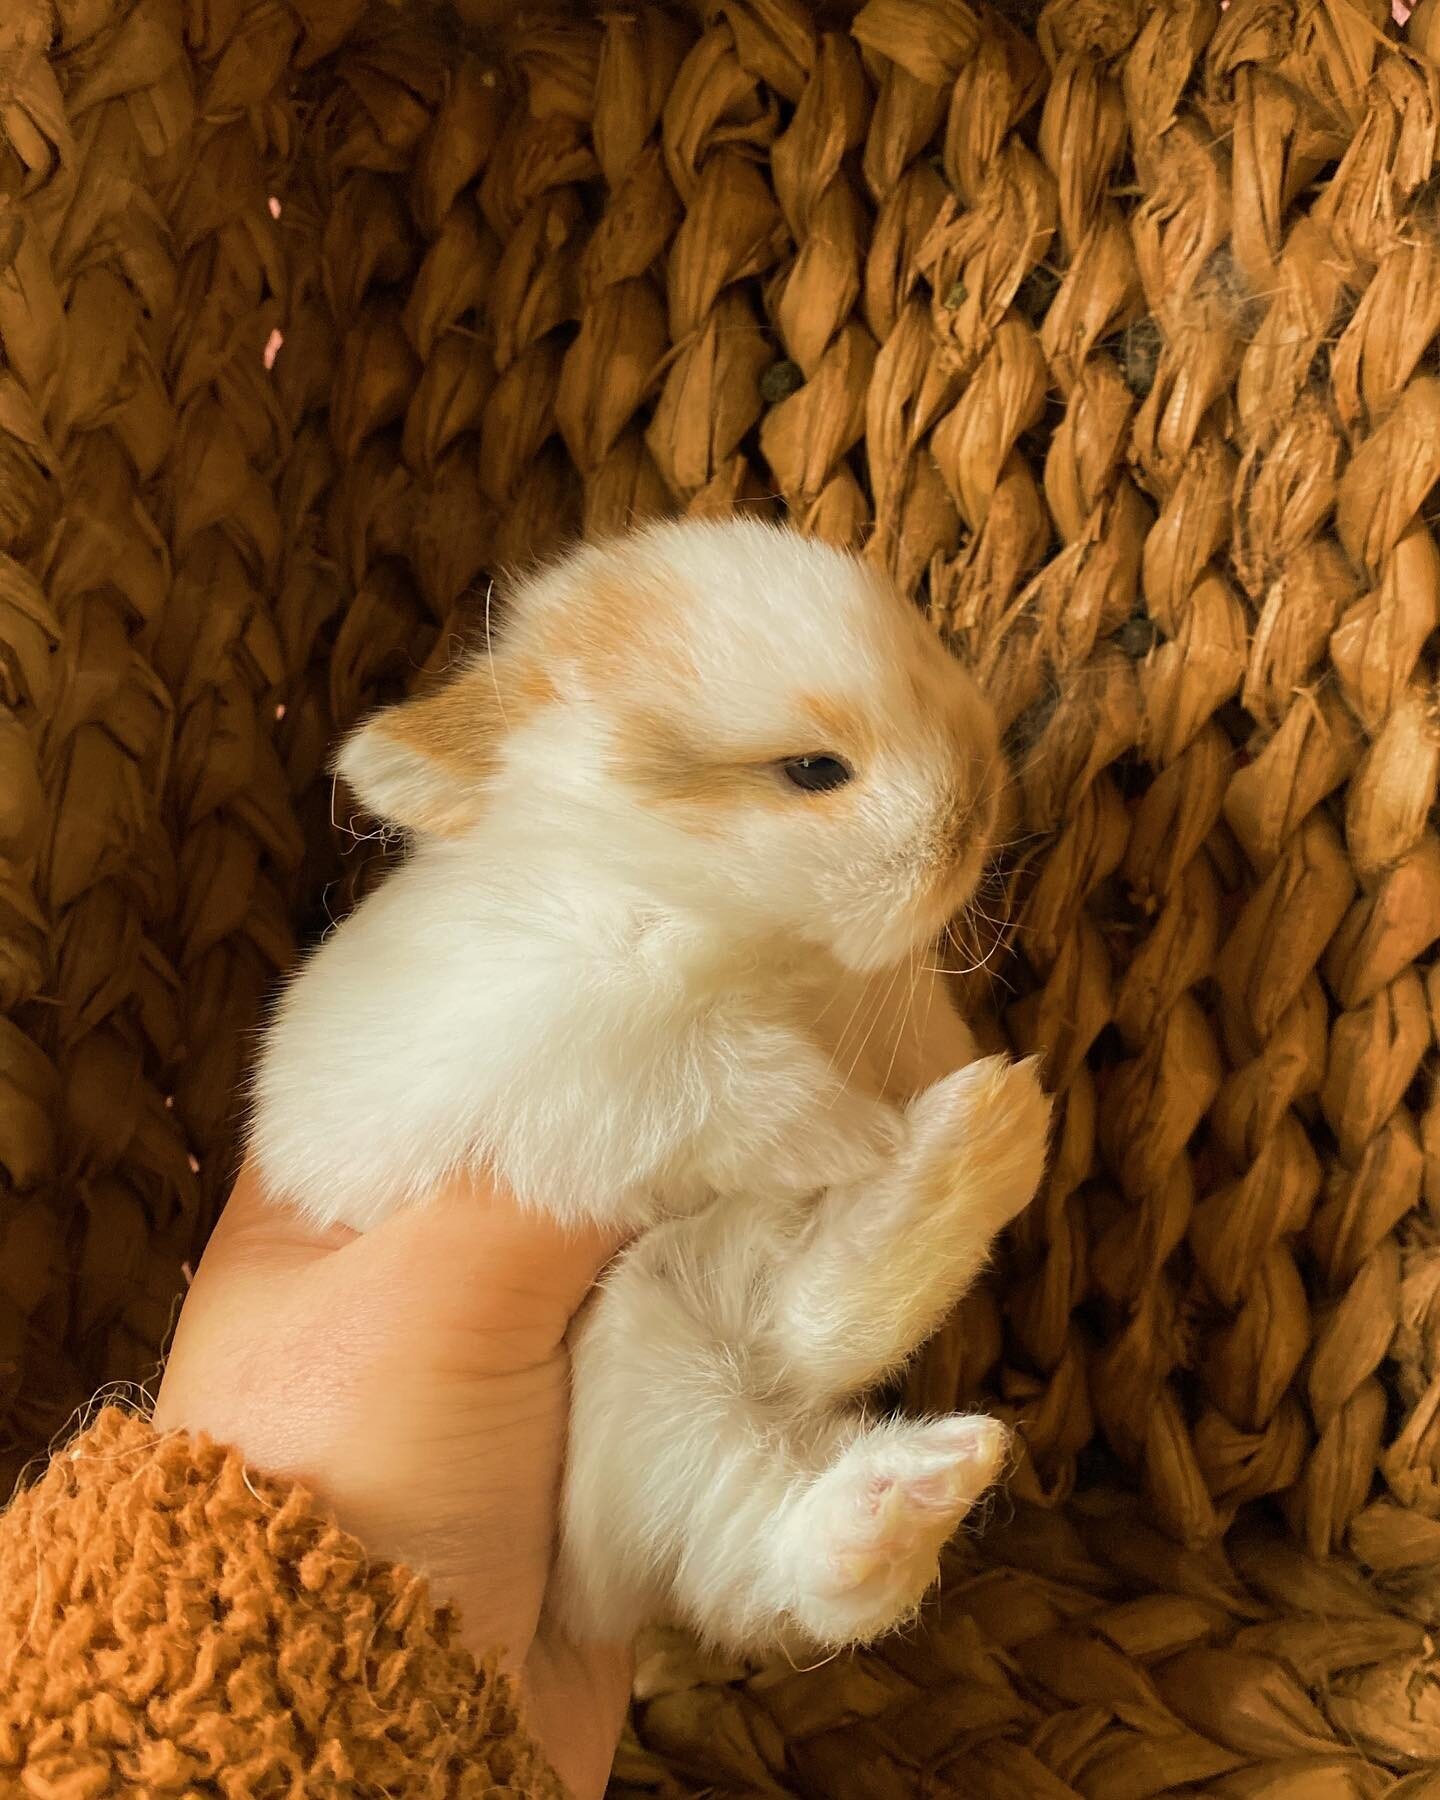 🍿Popcorn Babies🍿This little butter popcorn baby will be determined the gender in three weeks and we will be accepting the deposit then if you have gender preferences. 

If you don&rsquo;t mind the gender, we&rsquo;re open to take deposit now for th